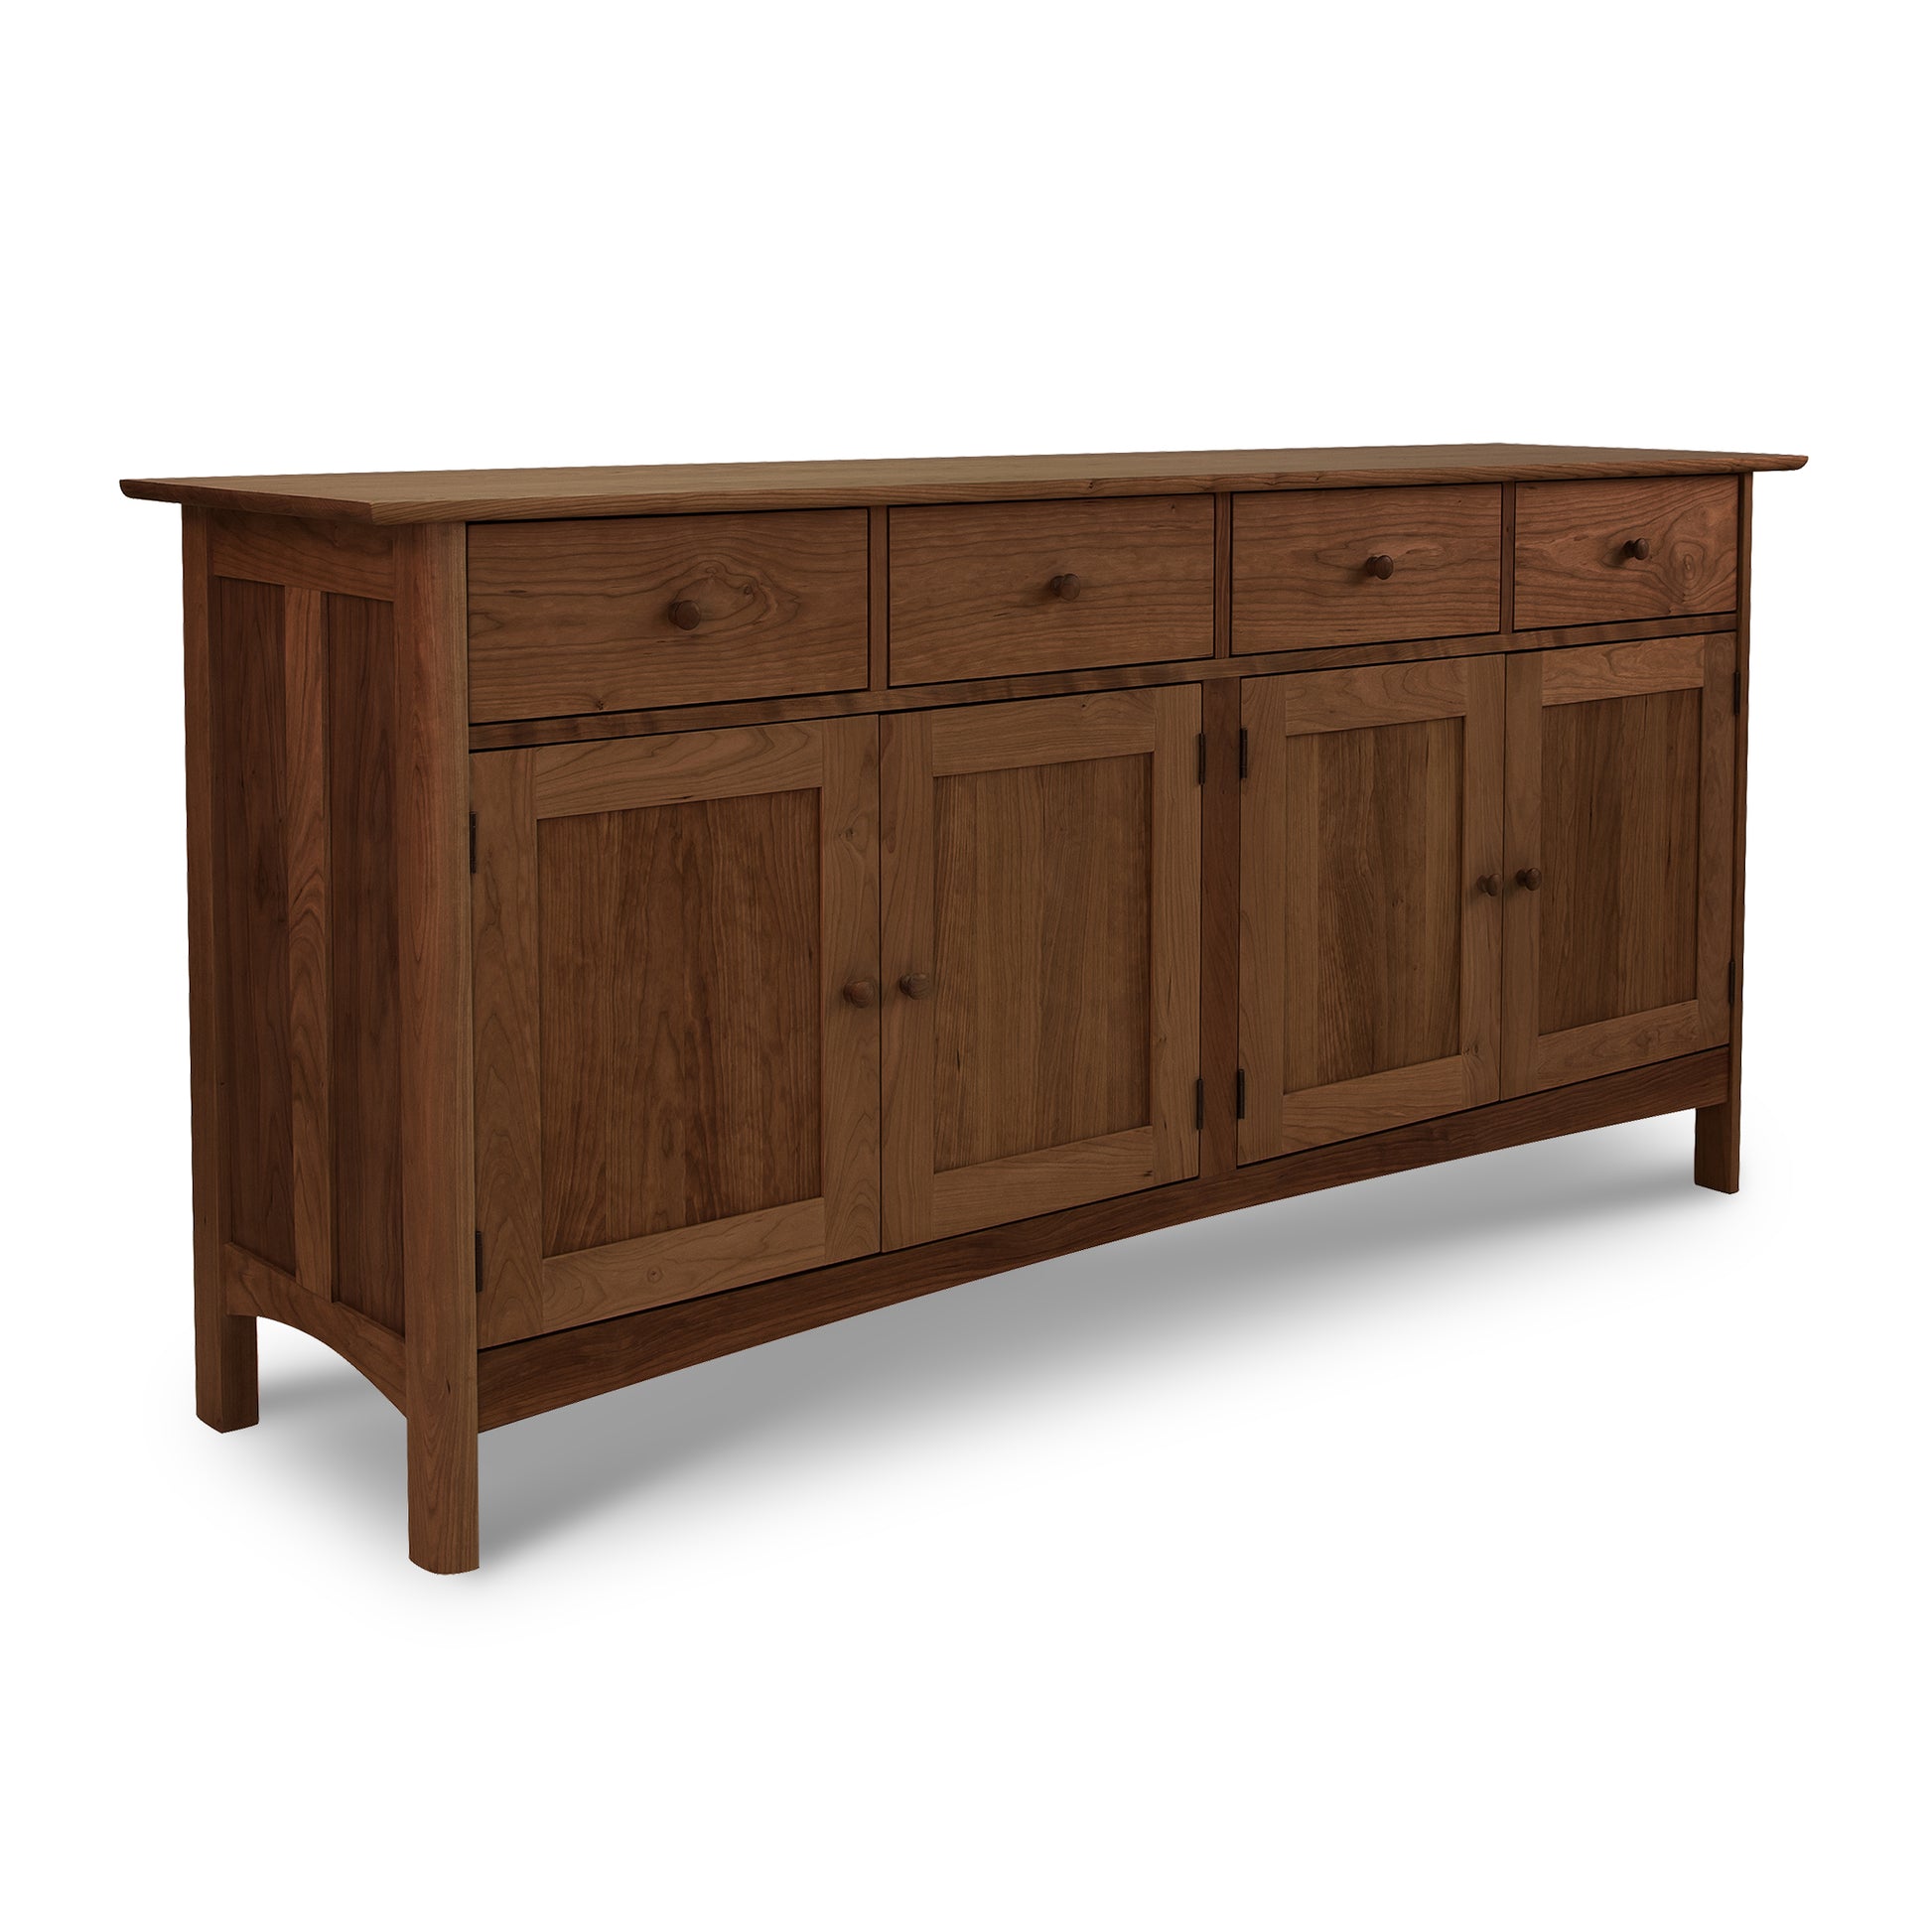 A Vermont Furniture Designs Heartwood Shaker Long Sideboard, crafted from solid wood with an eco-friendly oil finish, features three drawers and three doors on a white background.